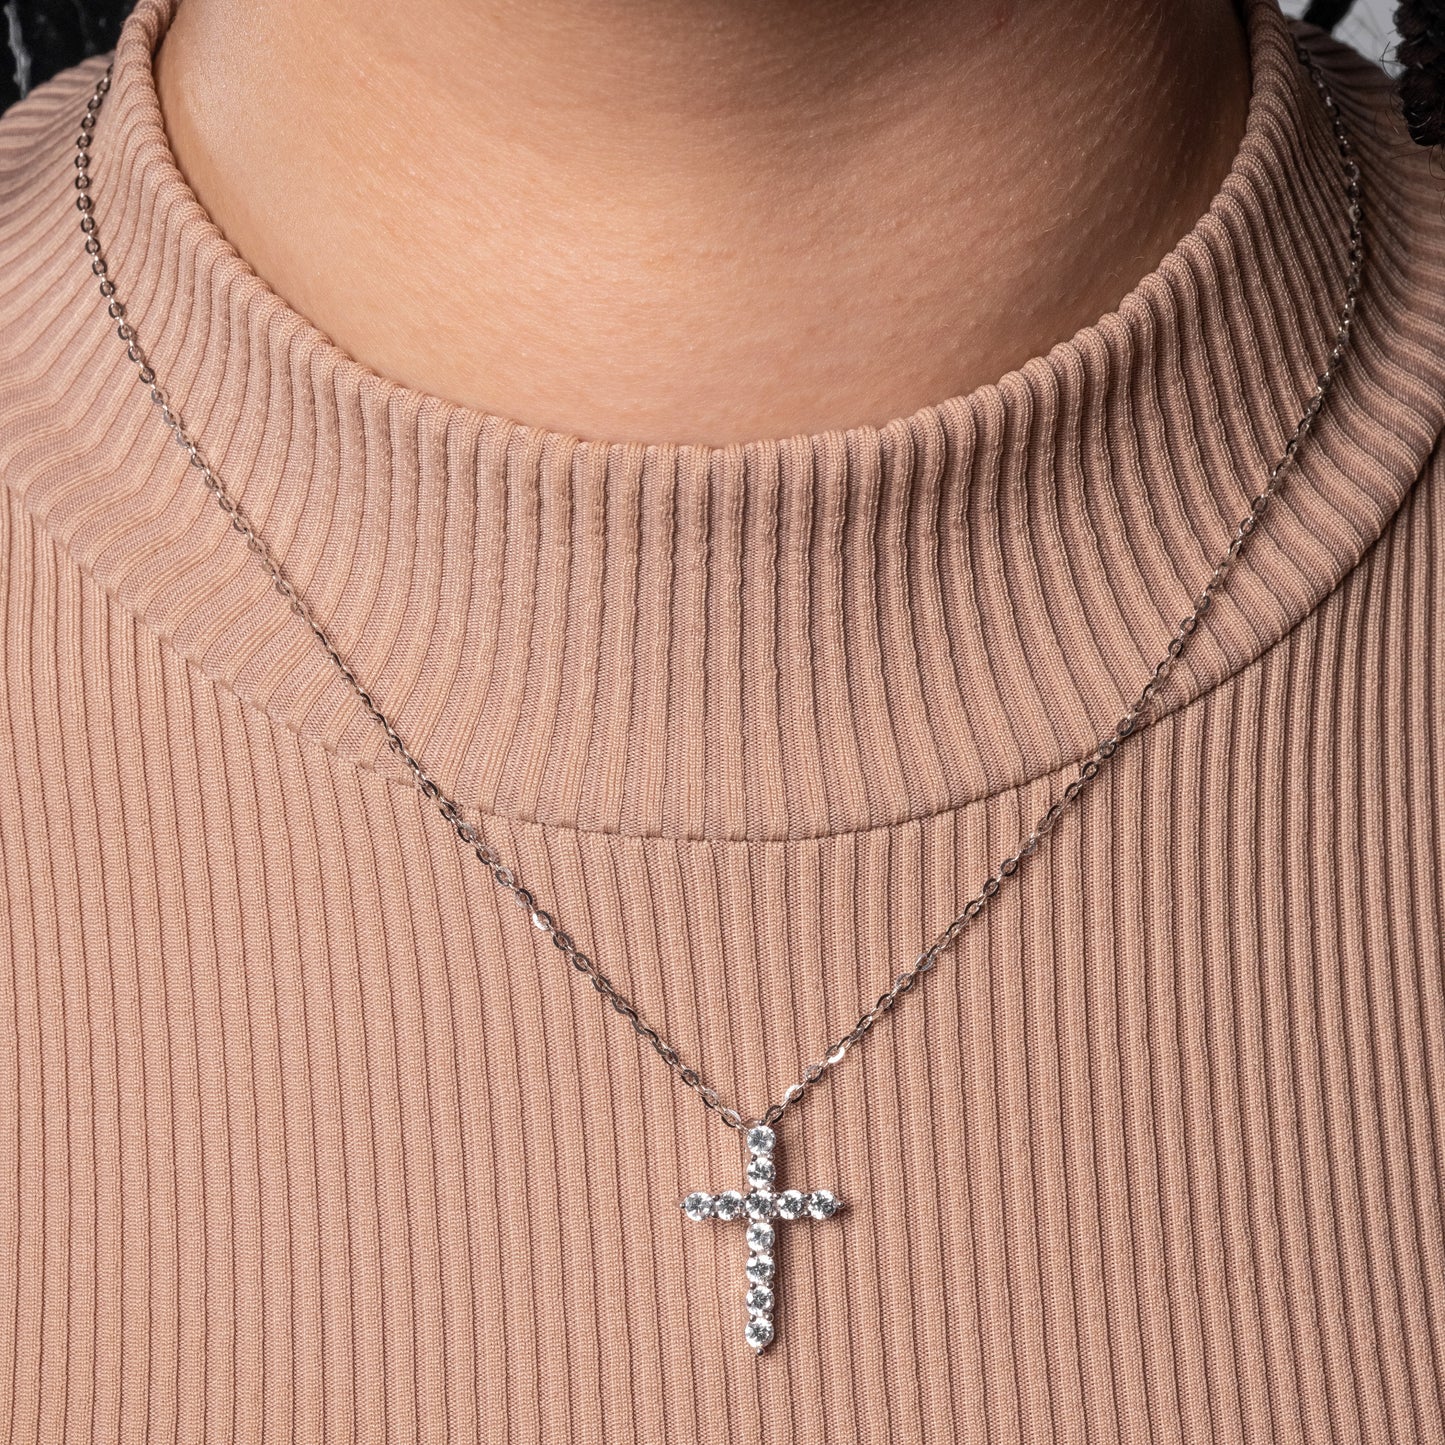 Iced Cross Pendant paired with Flat Cable necklace on the model